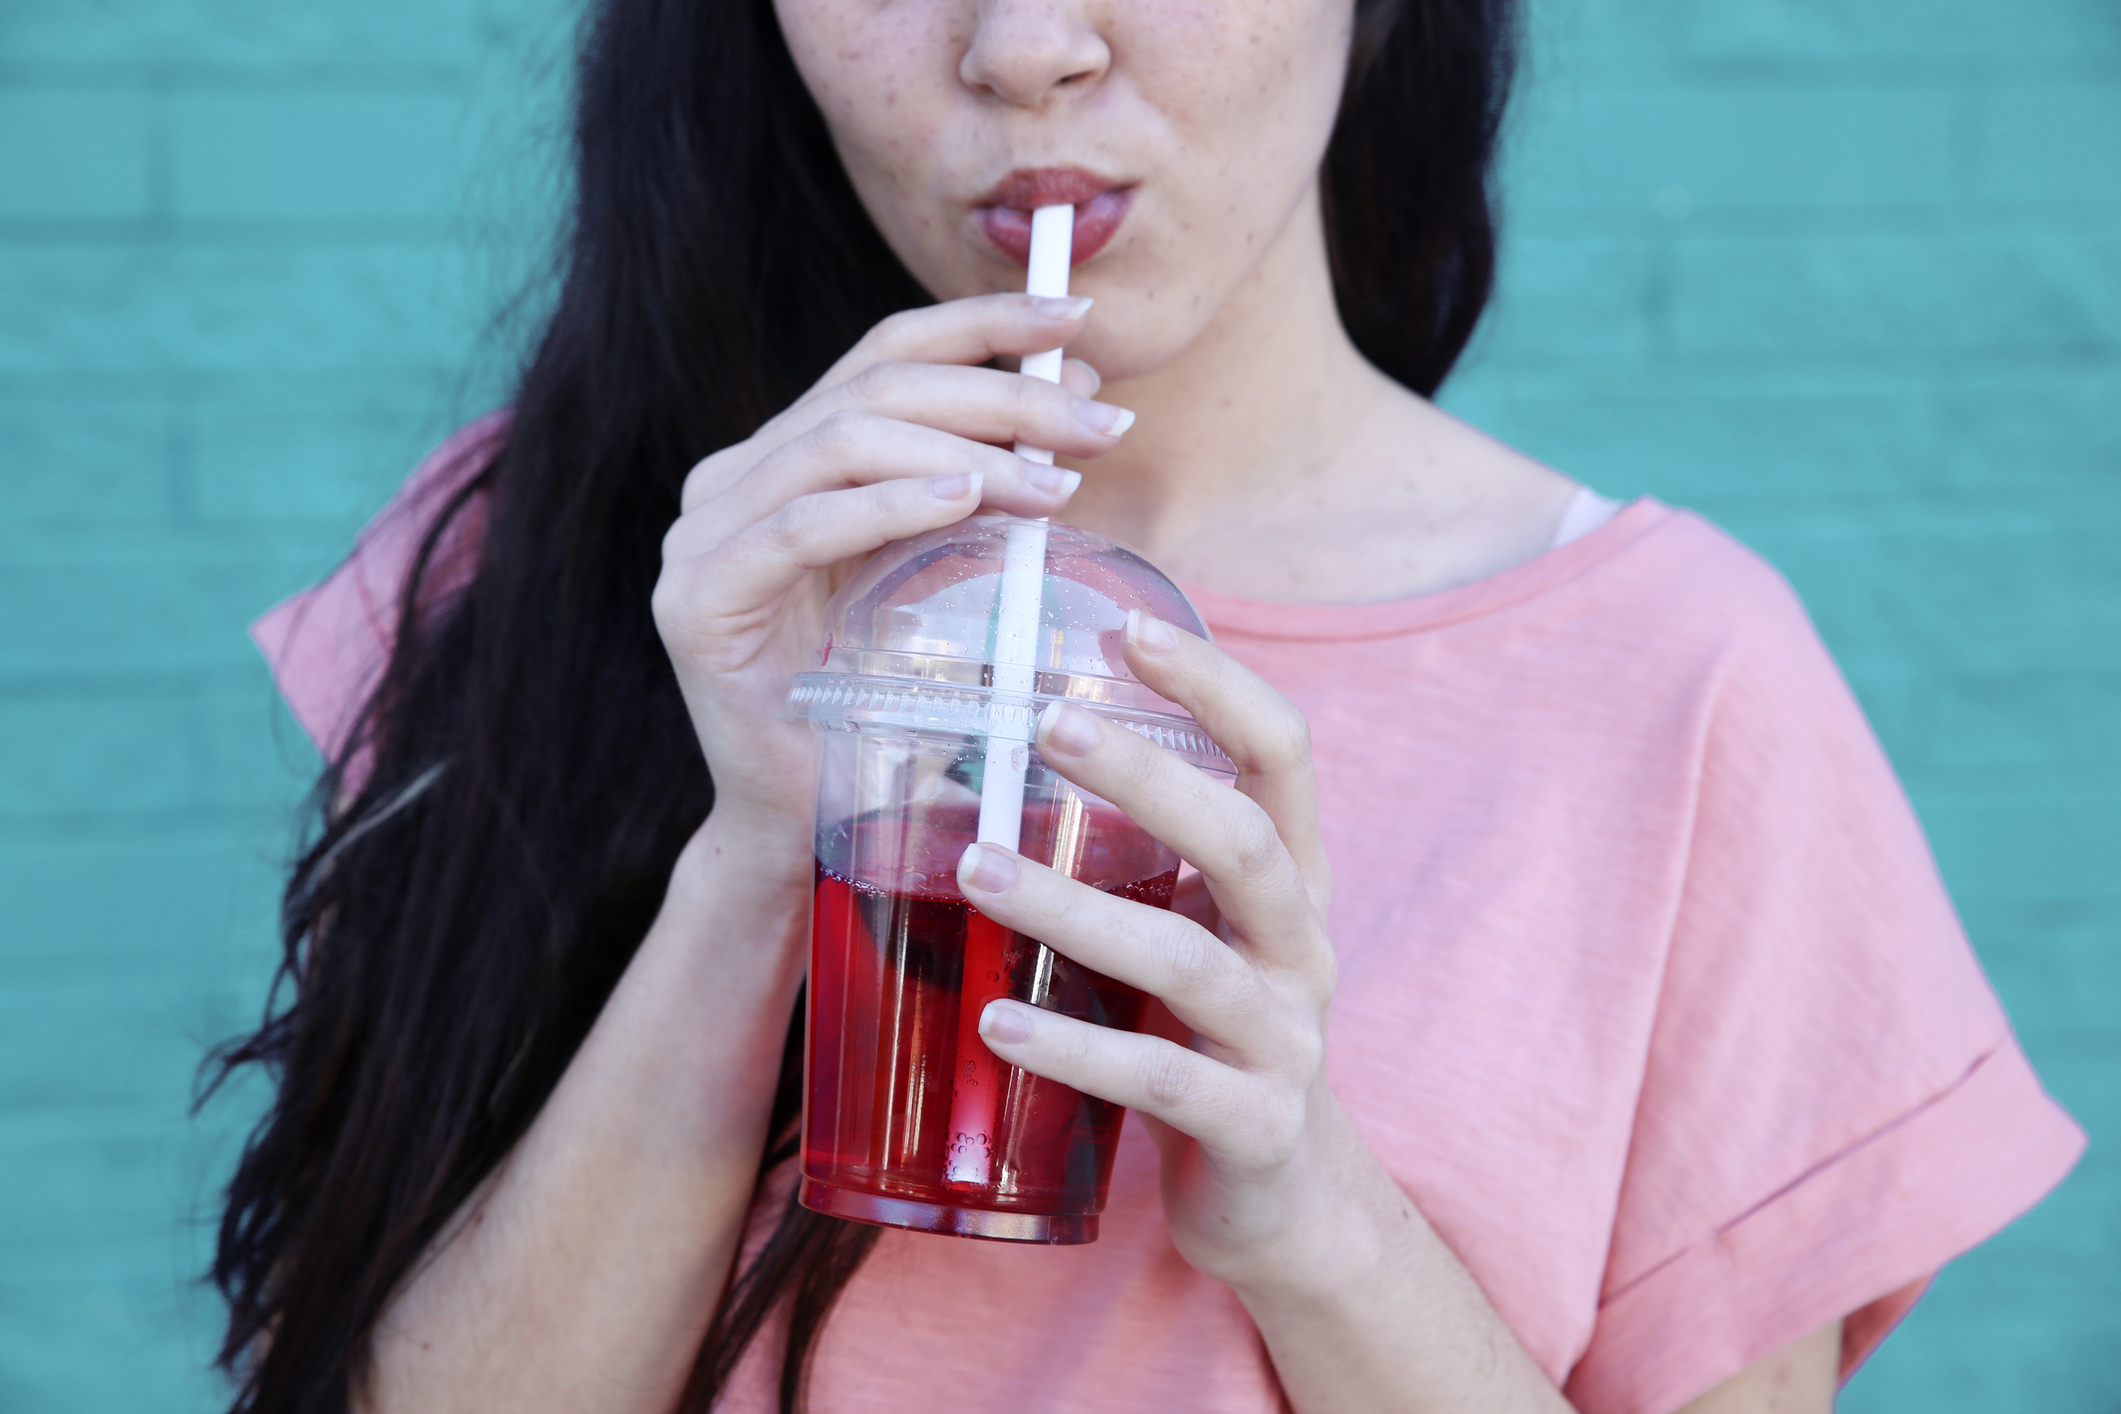 Person sipping a drink through a straw wearing a casual top